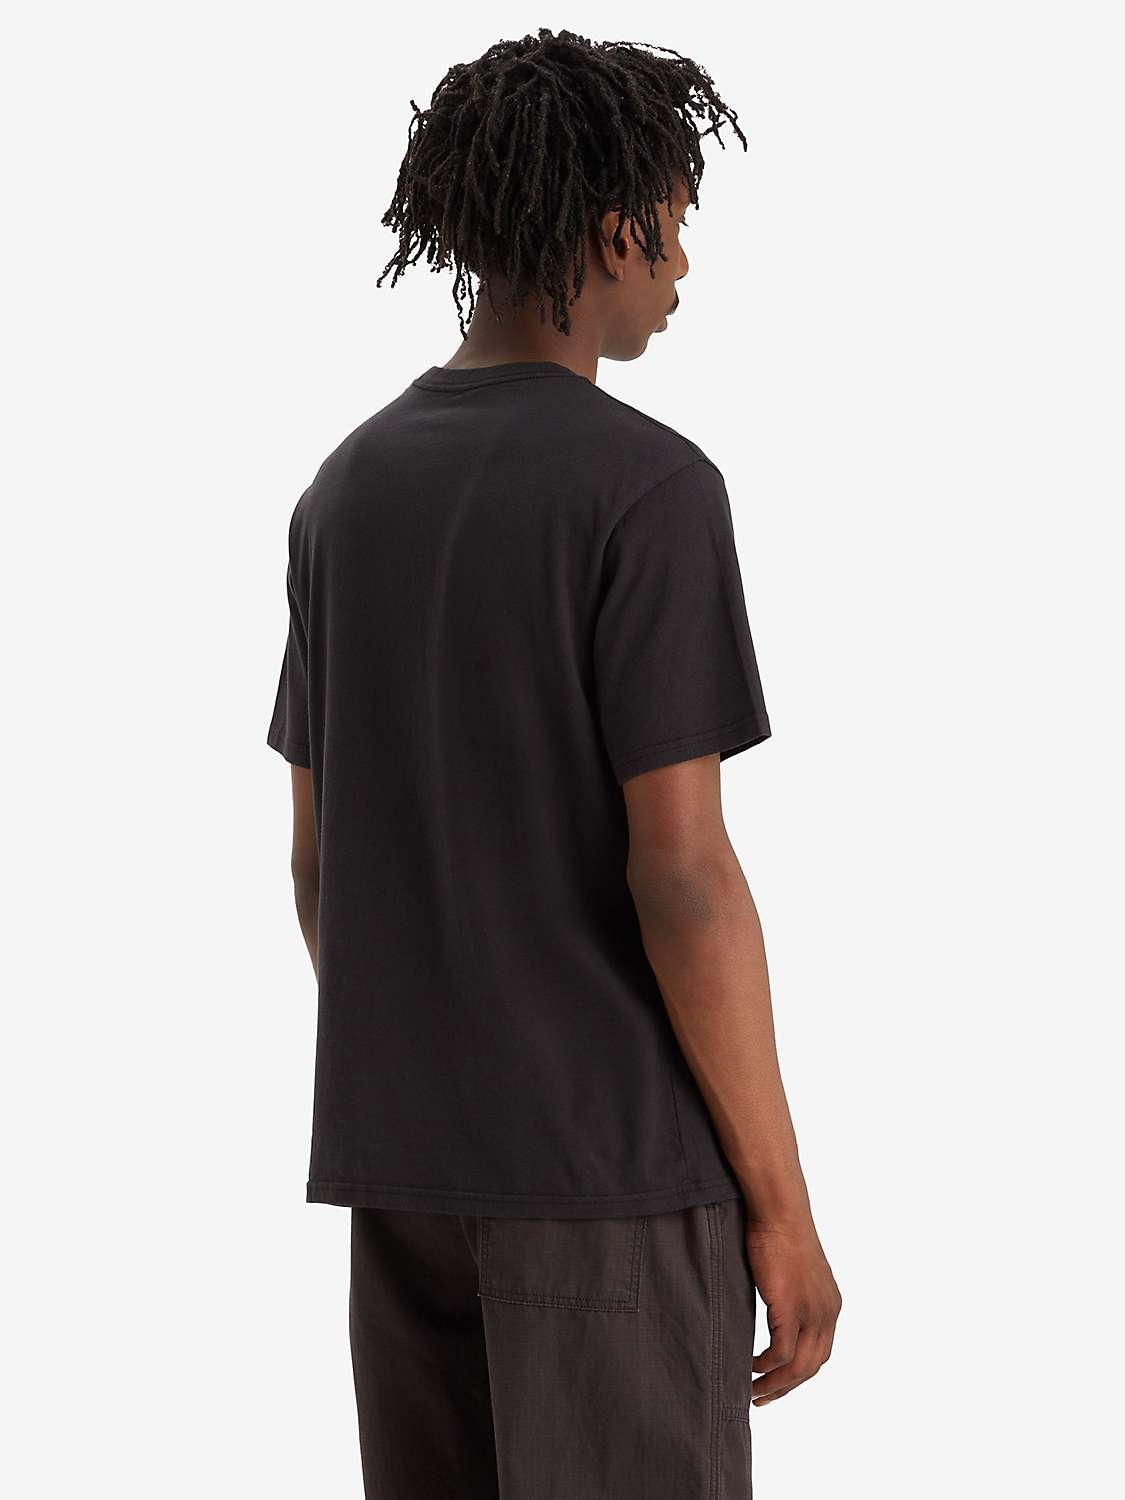 Buy Levi's Relaxed Fit Short Sleeve Graphic T-Shirt, Caviar Online at johnlewis.com